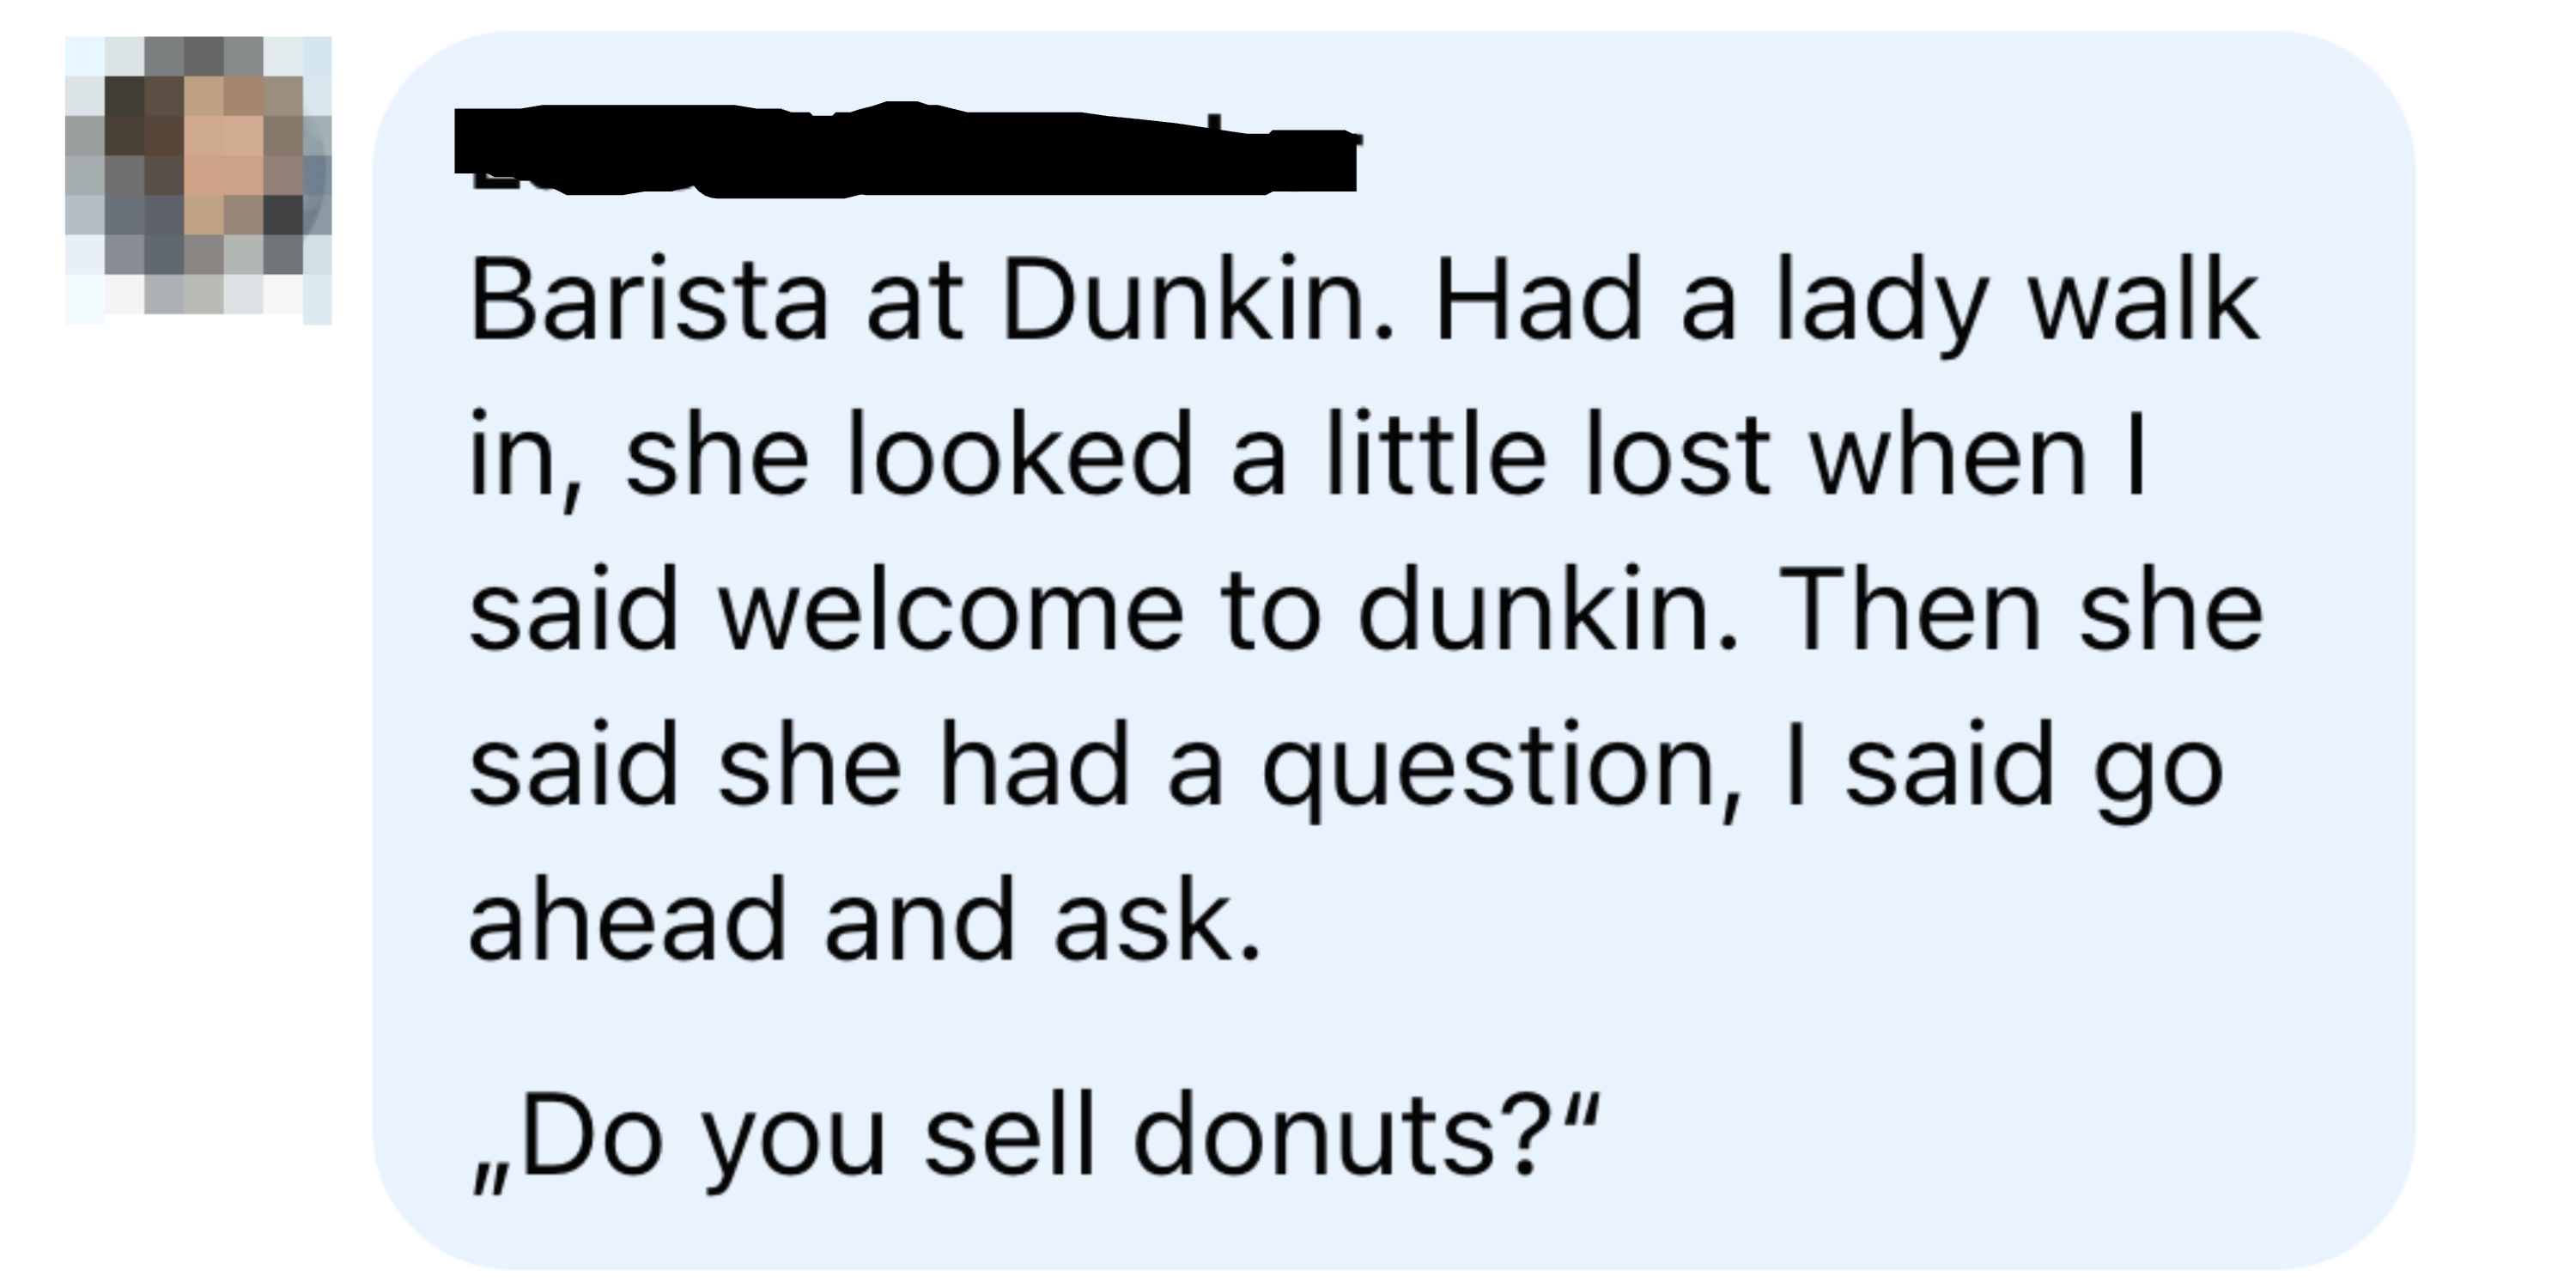 Image about a customer asking if Dunkin&#x27; sells donuts